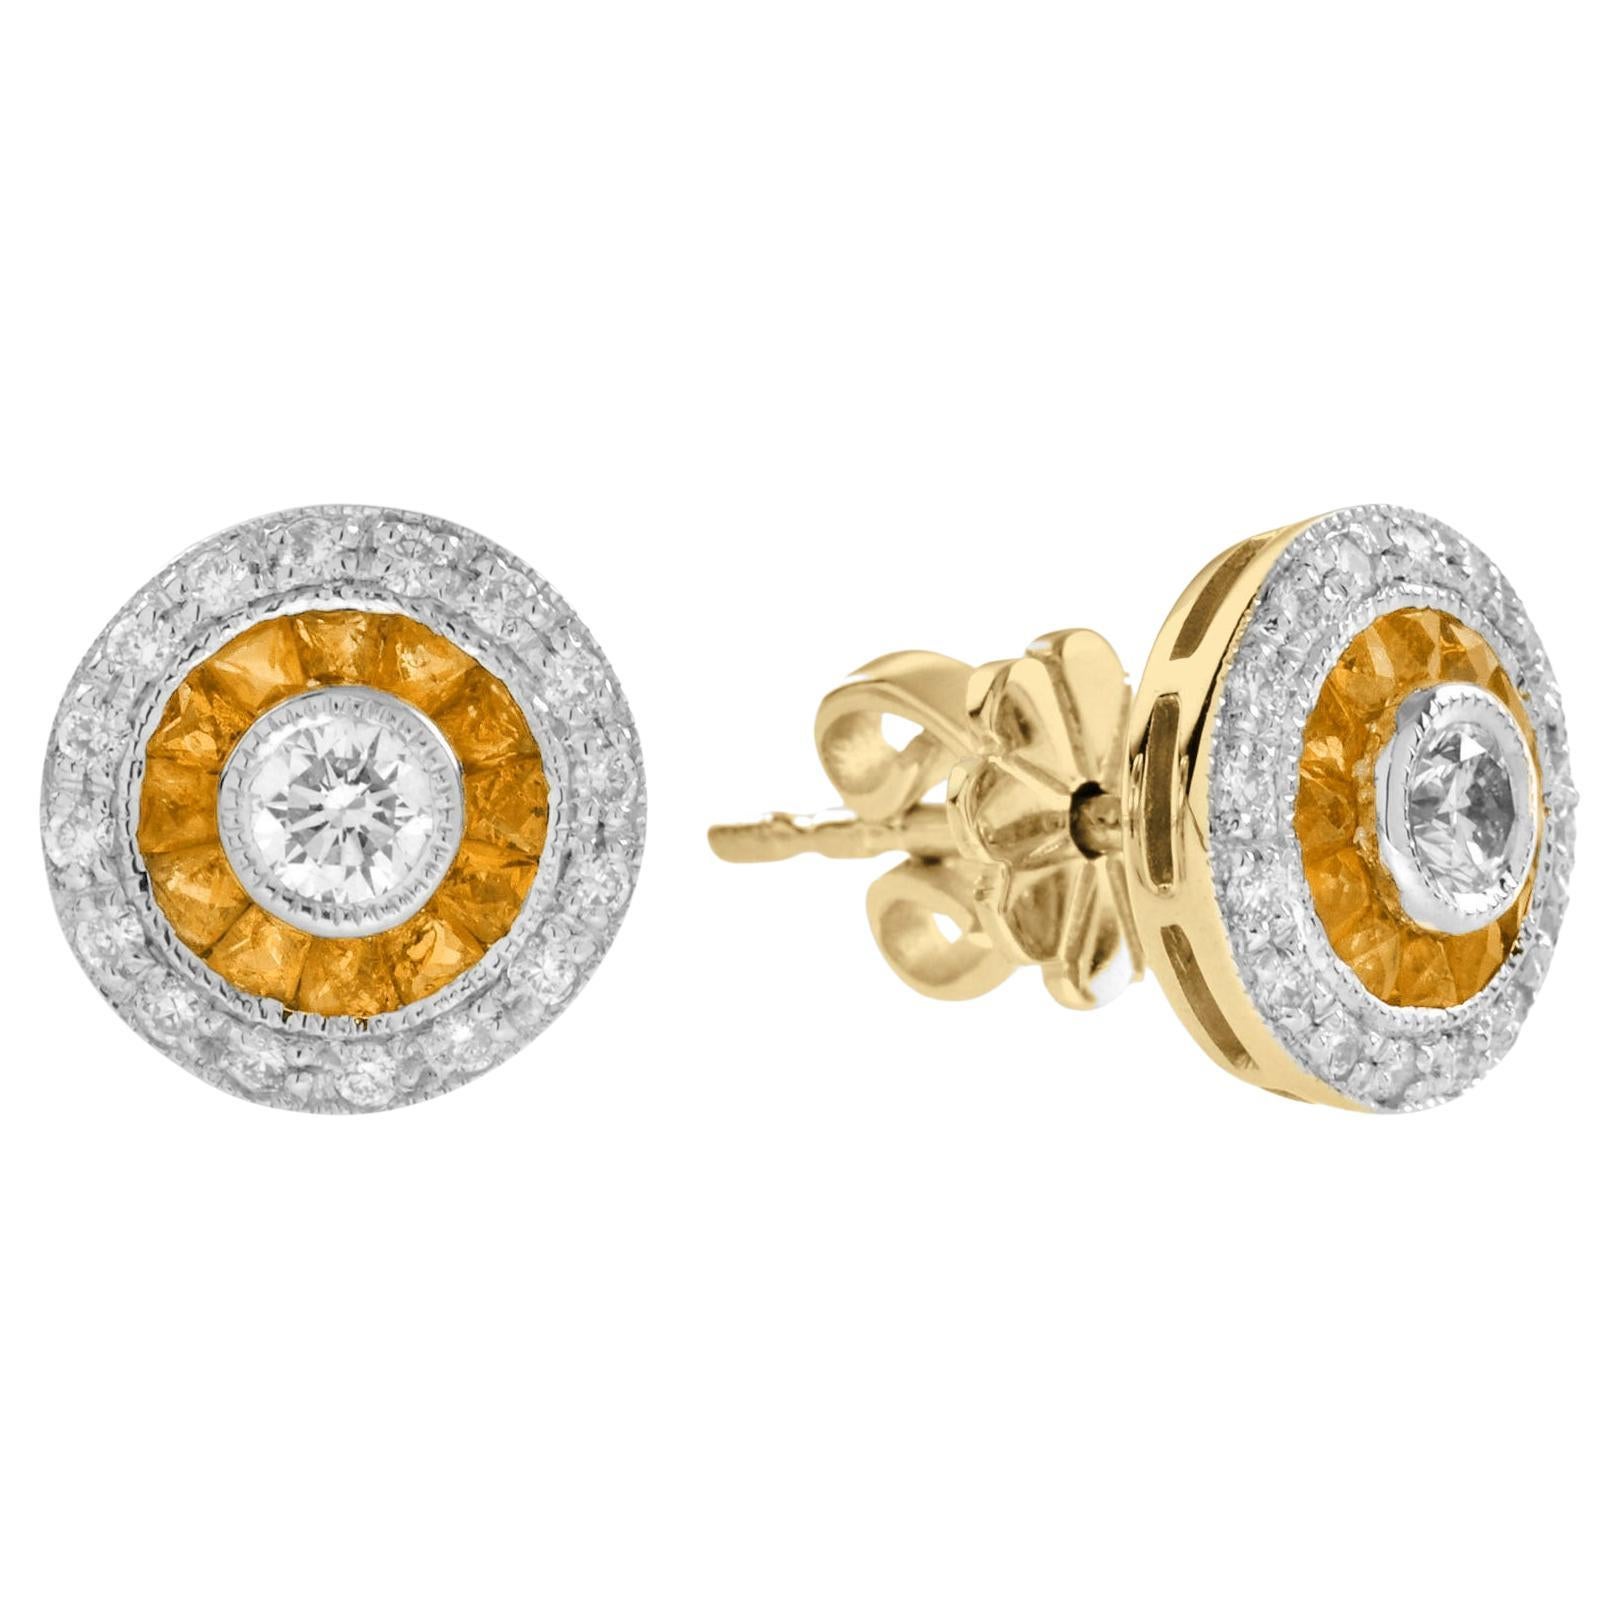 Diamond and Yellow Sapphire Deco Style Target Stud Earrings in 18K Two Tone Gold